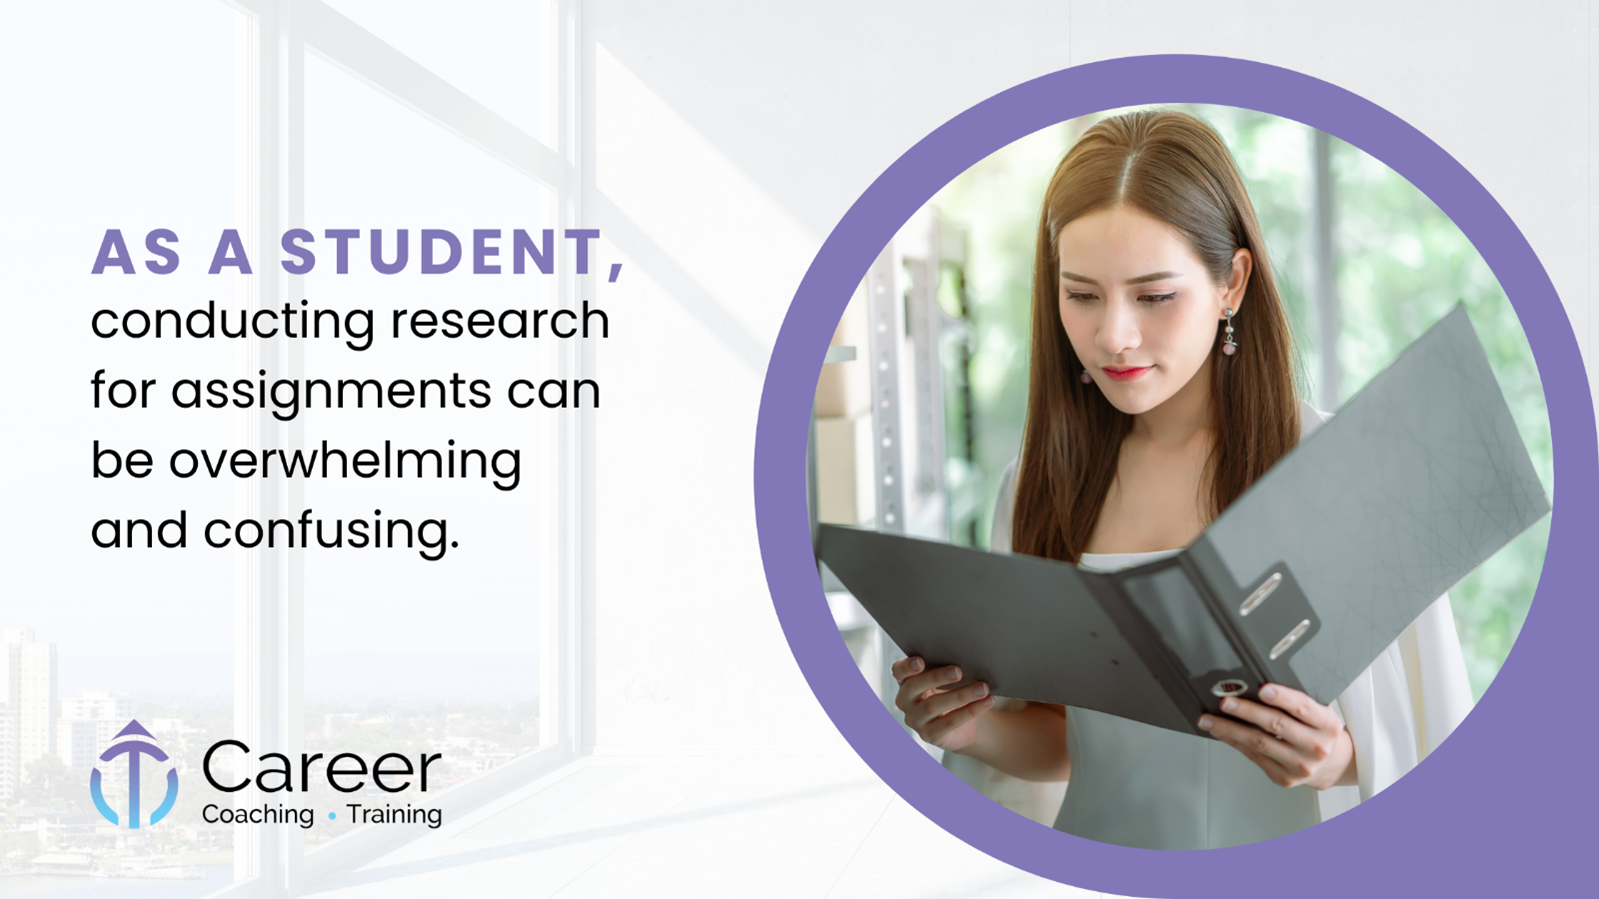 As a student, conducting research for assignments can be overwhelming and confusing.